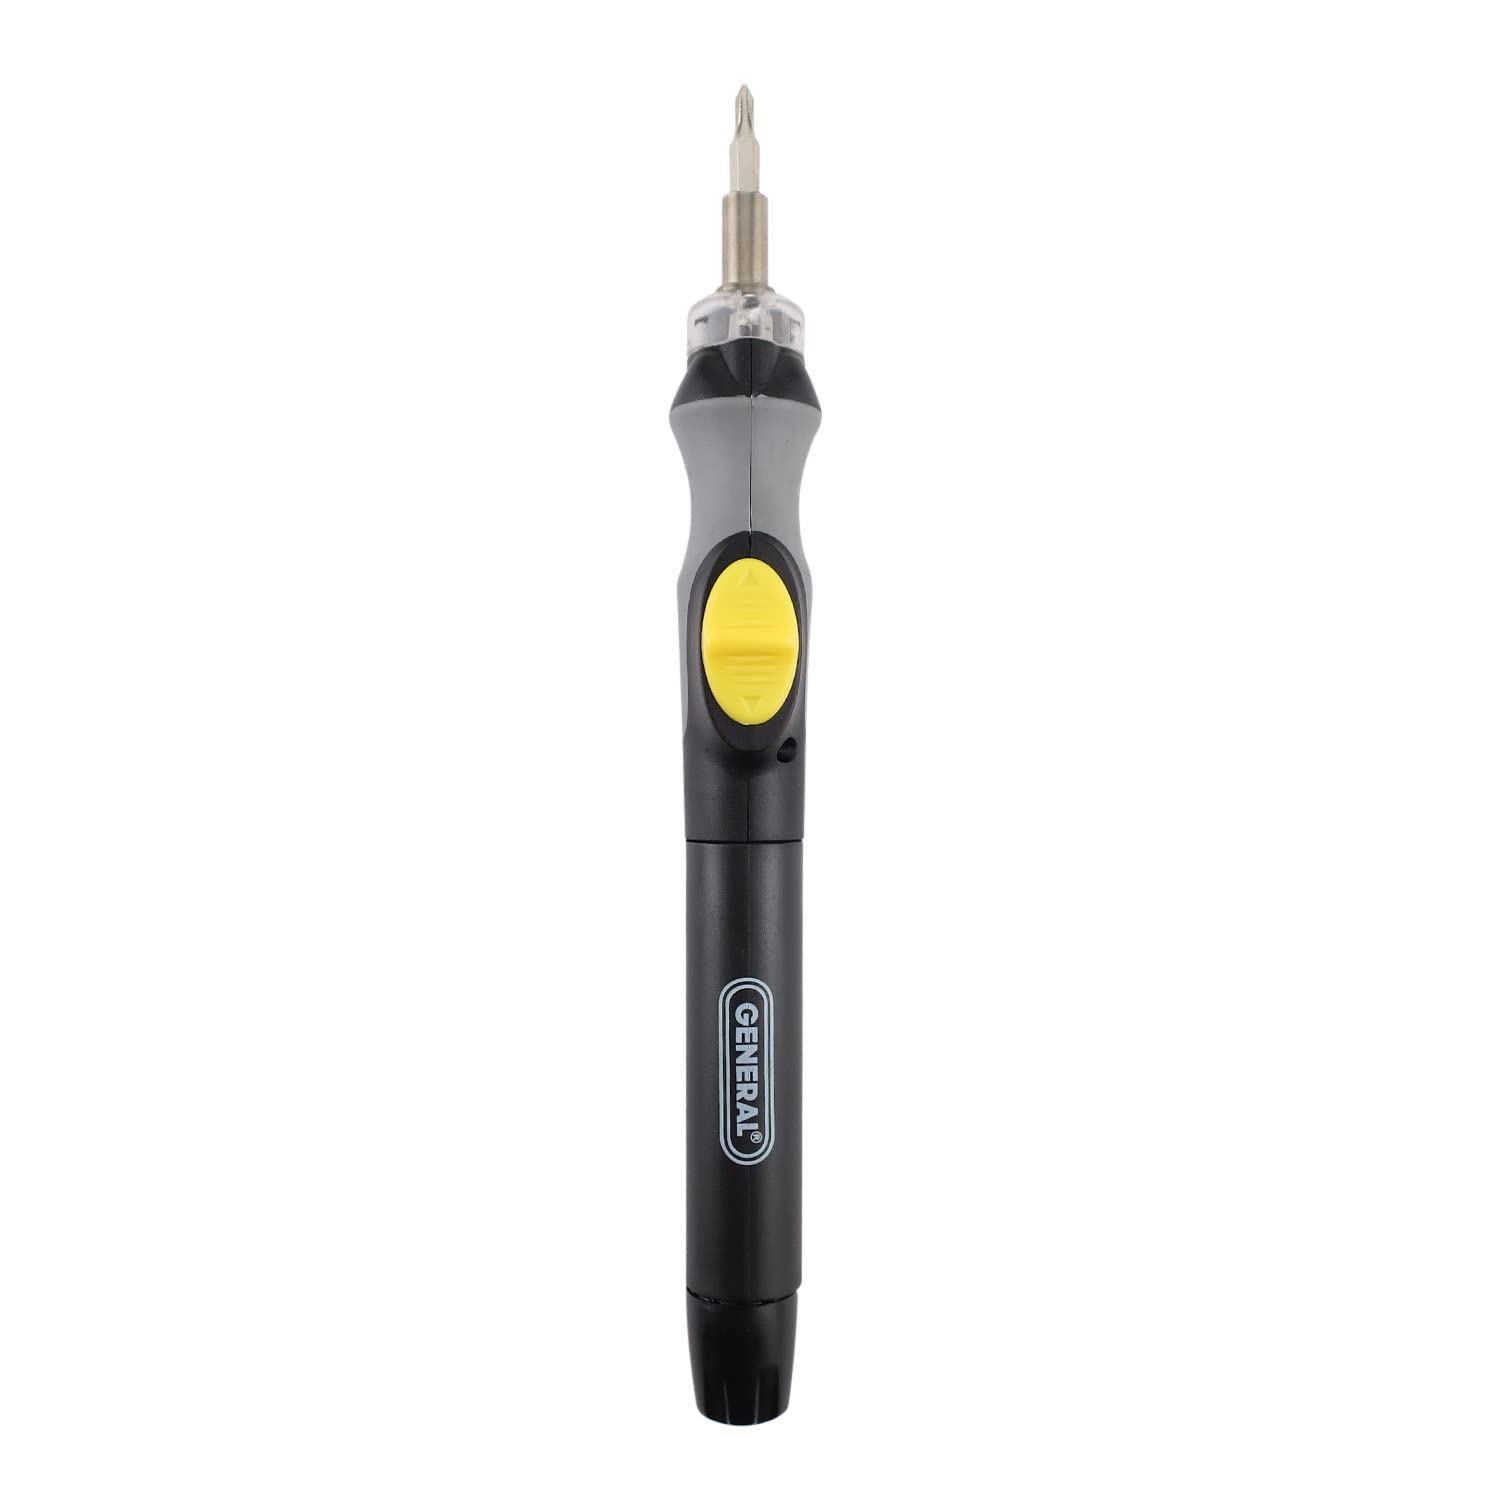 General Tools Cordless Lighted Power Precision Screwdriver #502 - Super-Torque Drive for Electronics, and DIY Crafts